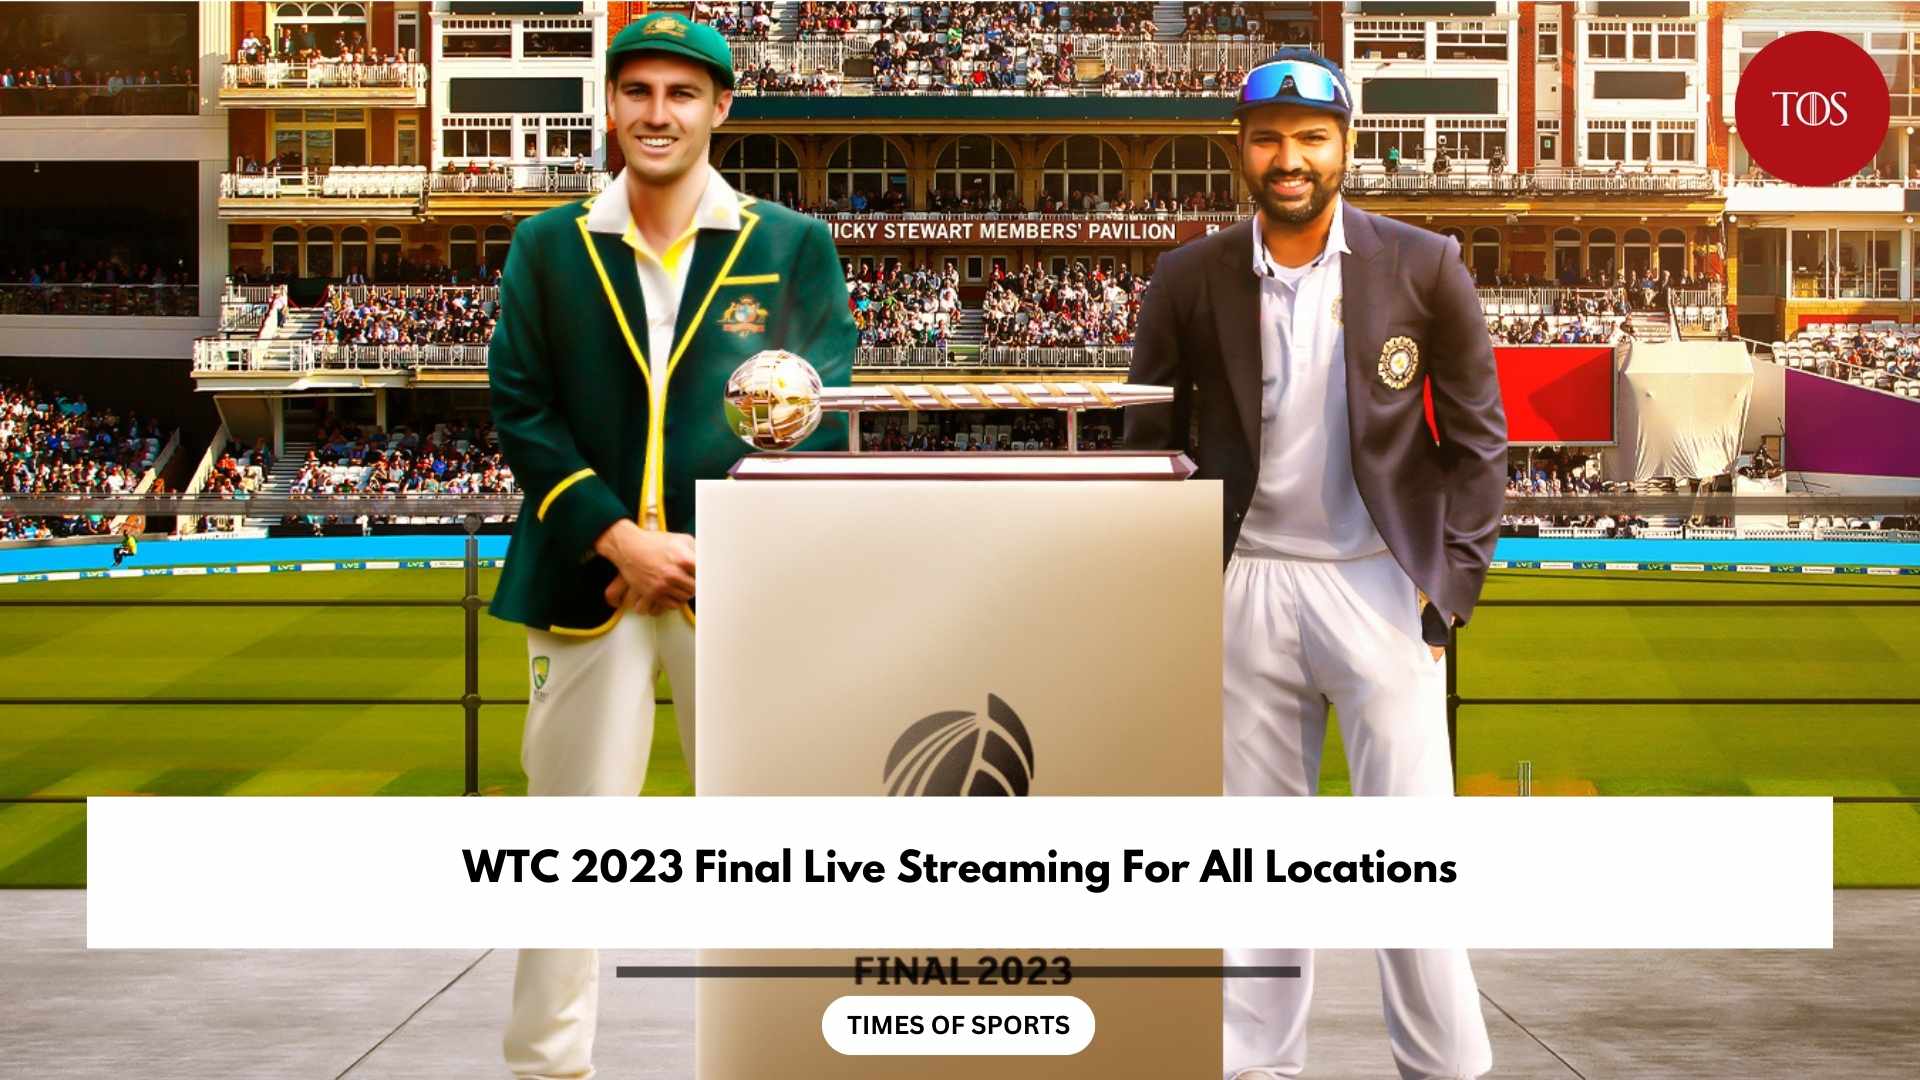 WTC 2023 Final Live Streaming For All Locations